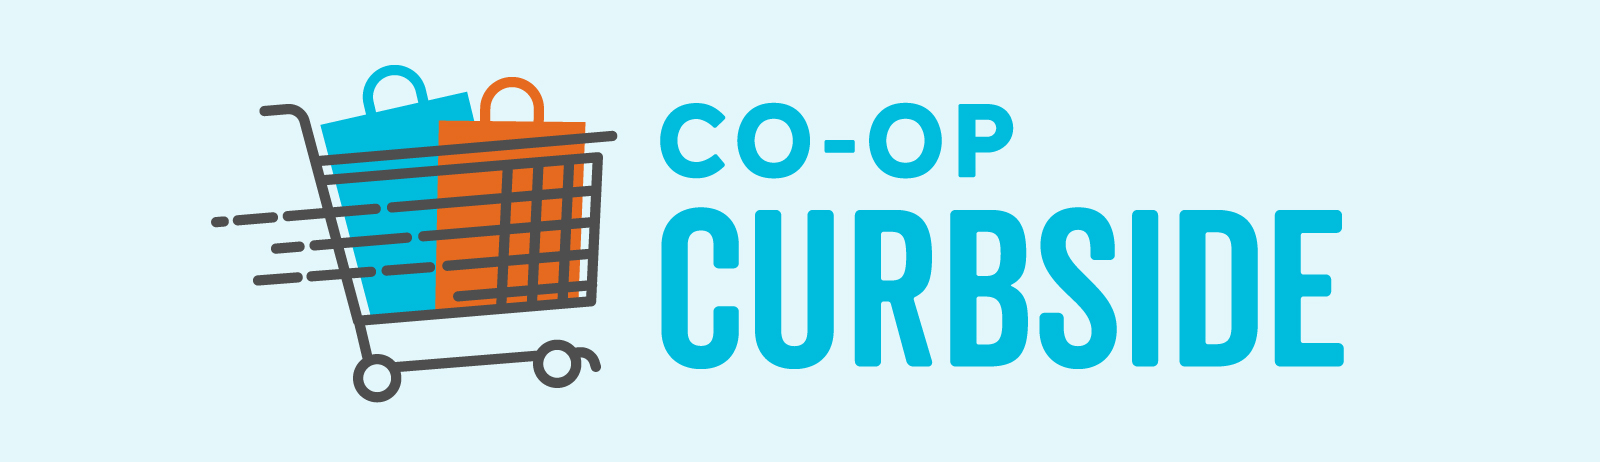 Co-op Curbside Grocery Pick-up